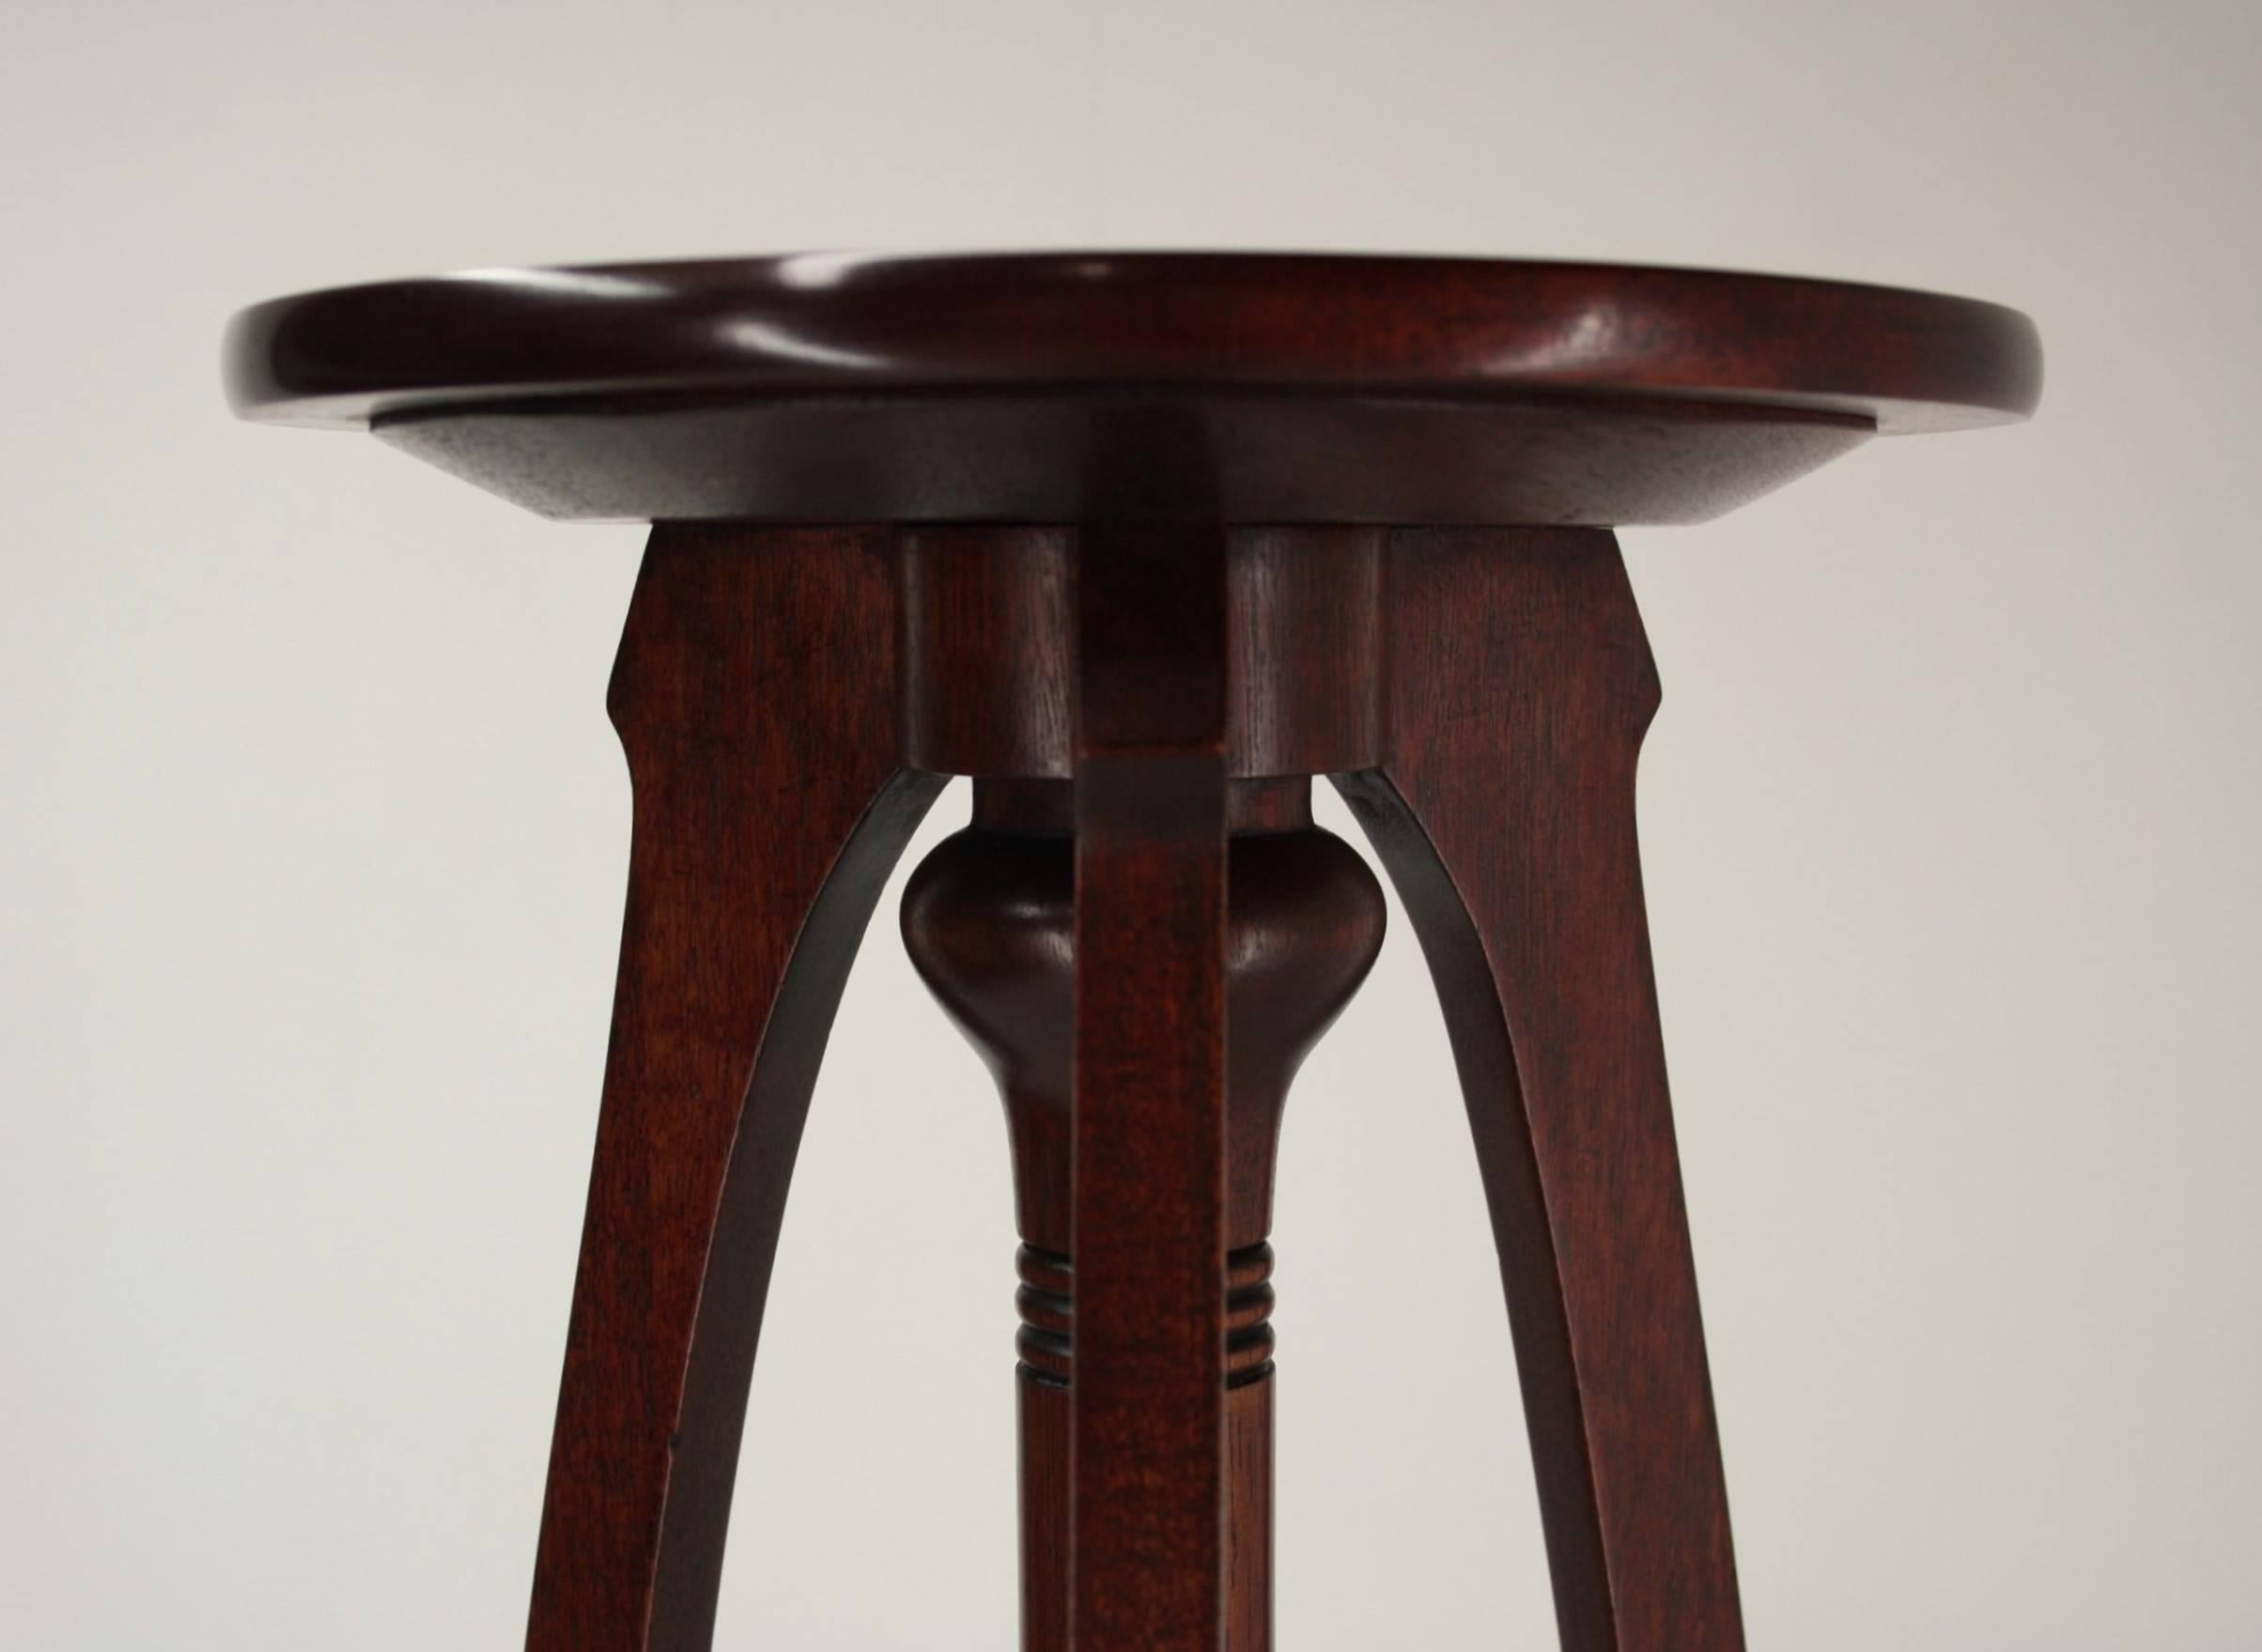 A Belgian Art Nouveau mahogany pedestal in the style of Paul Hankar, Gustave Serrurrier-Bovy. Made for the exhibition of Tervueren in 1897.